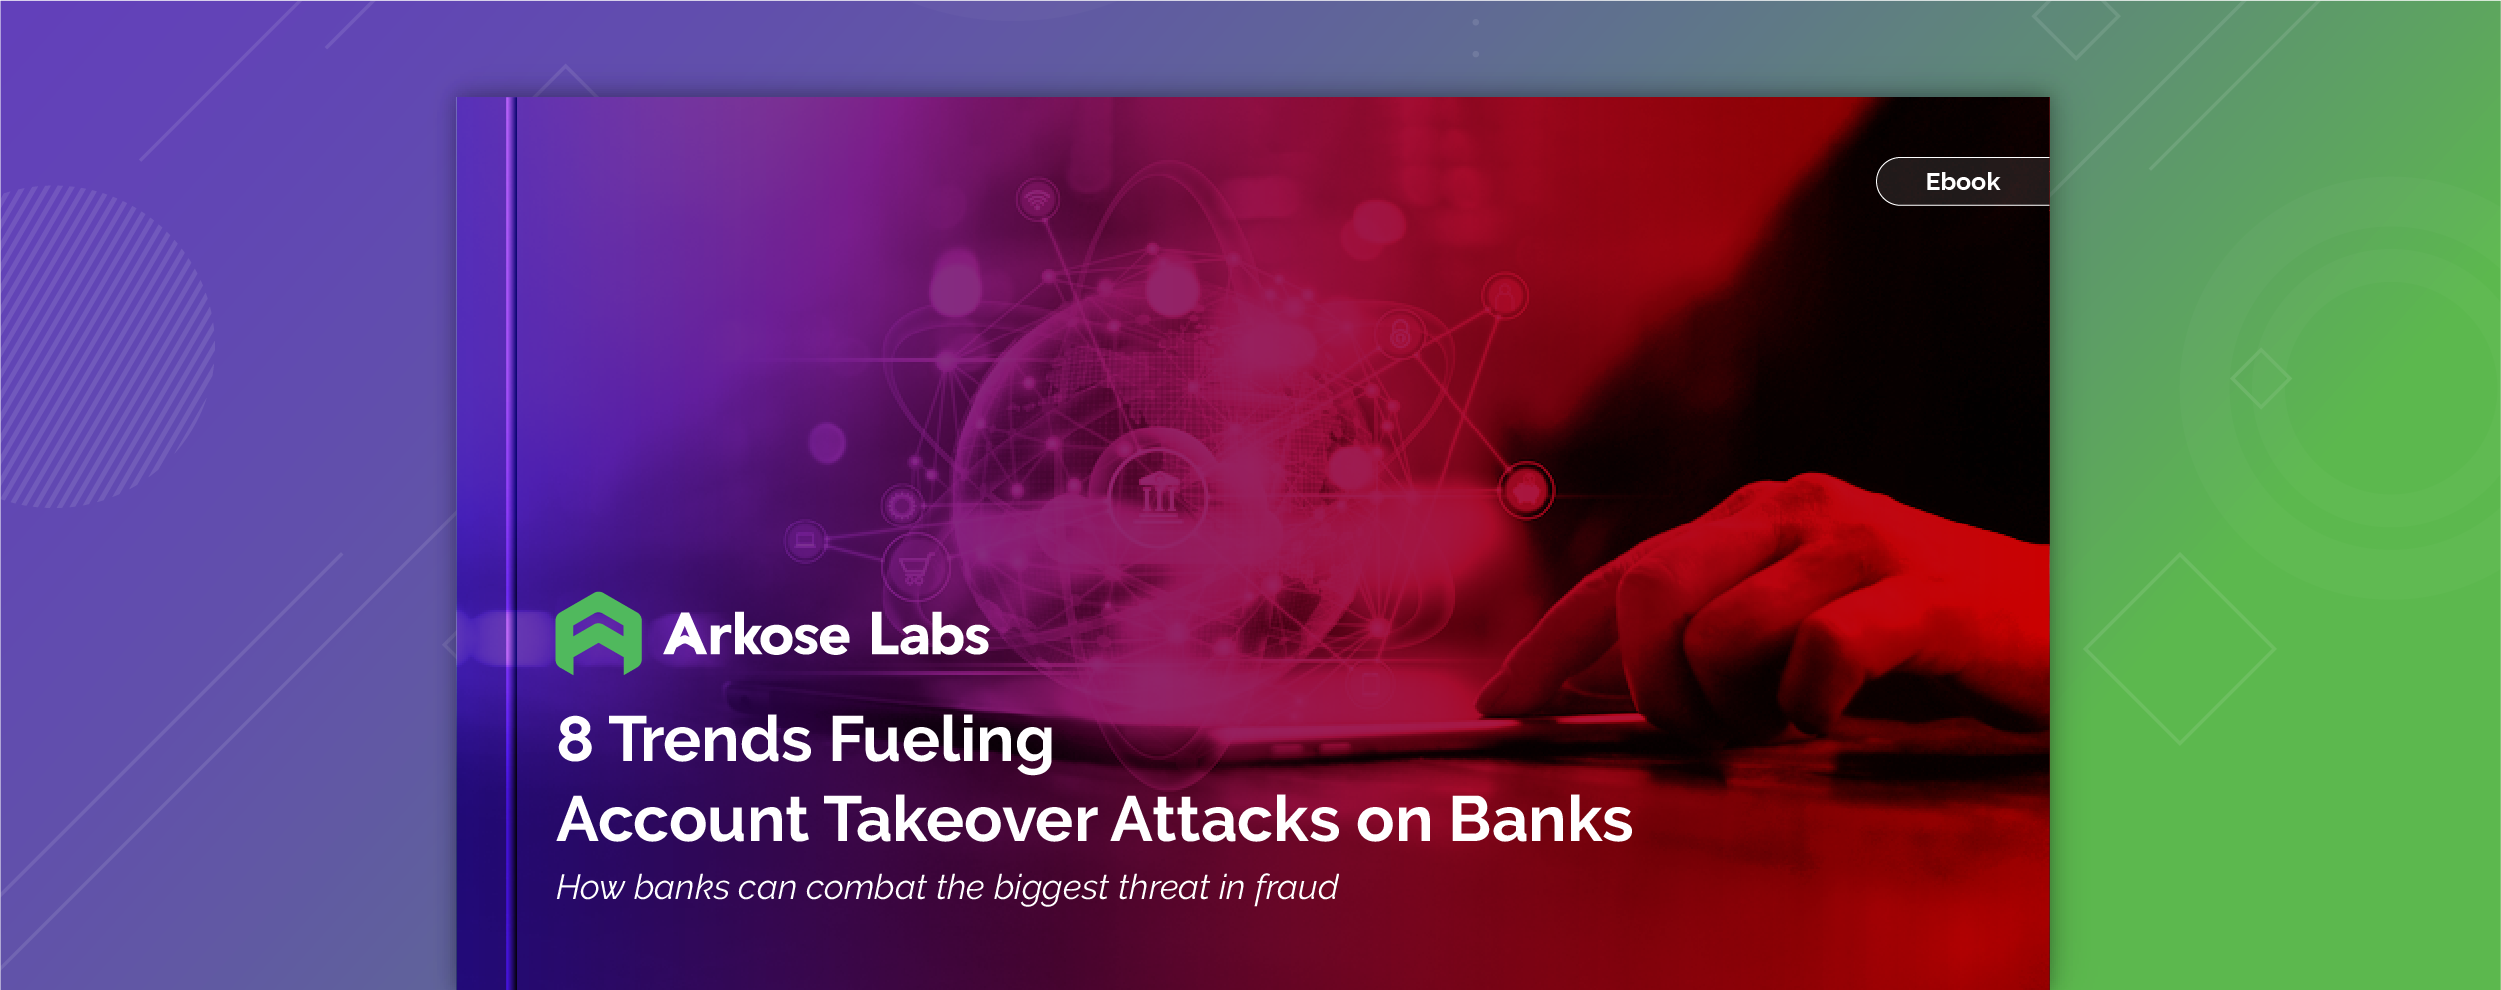 8 Trends Fueling Account Takeover Attacks on Banks